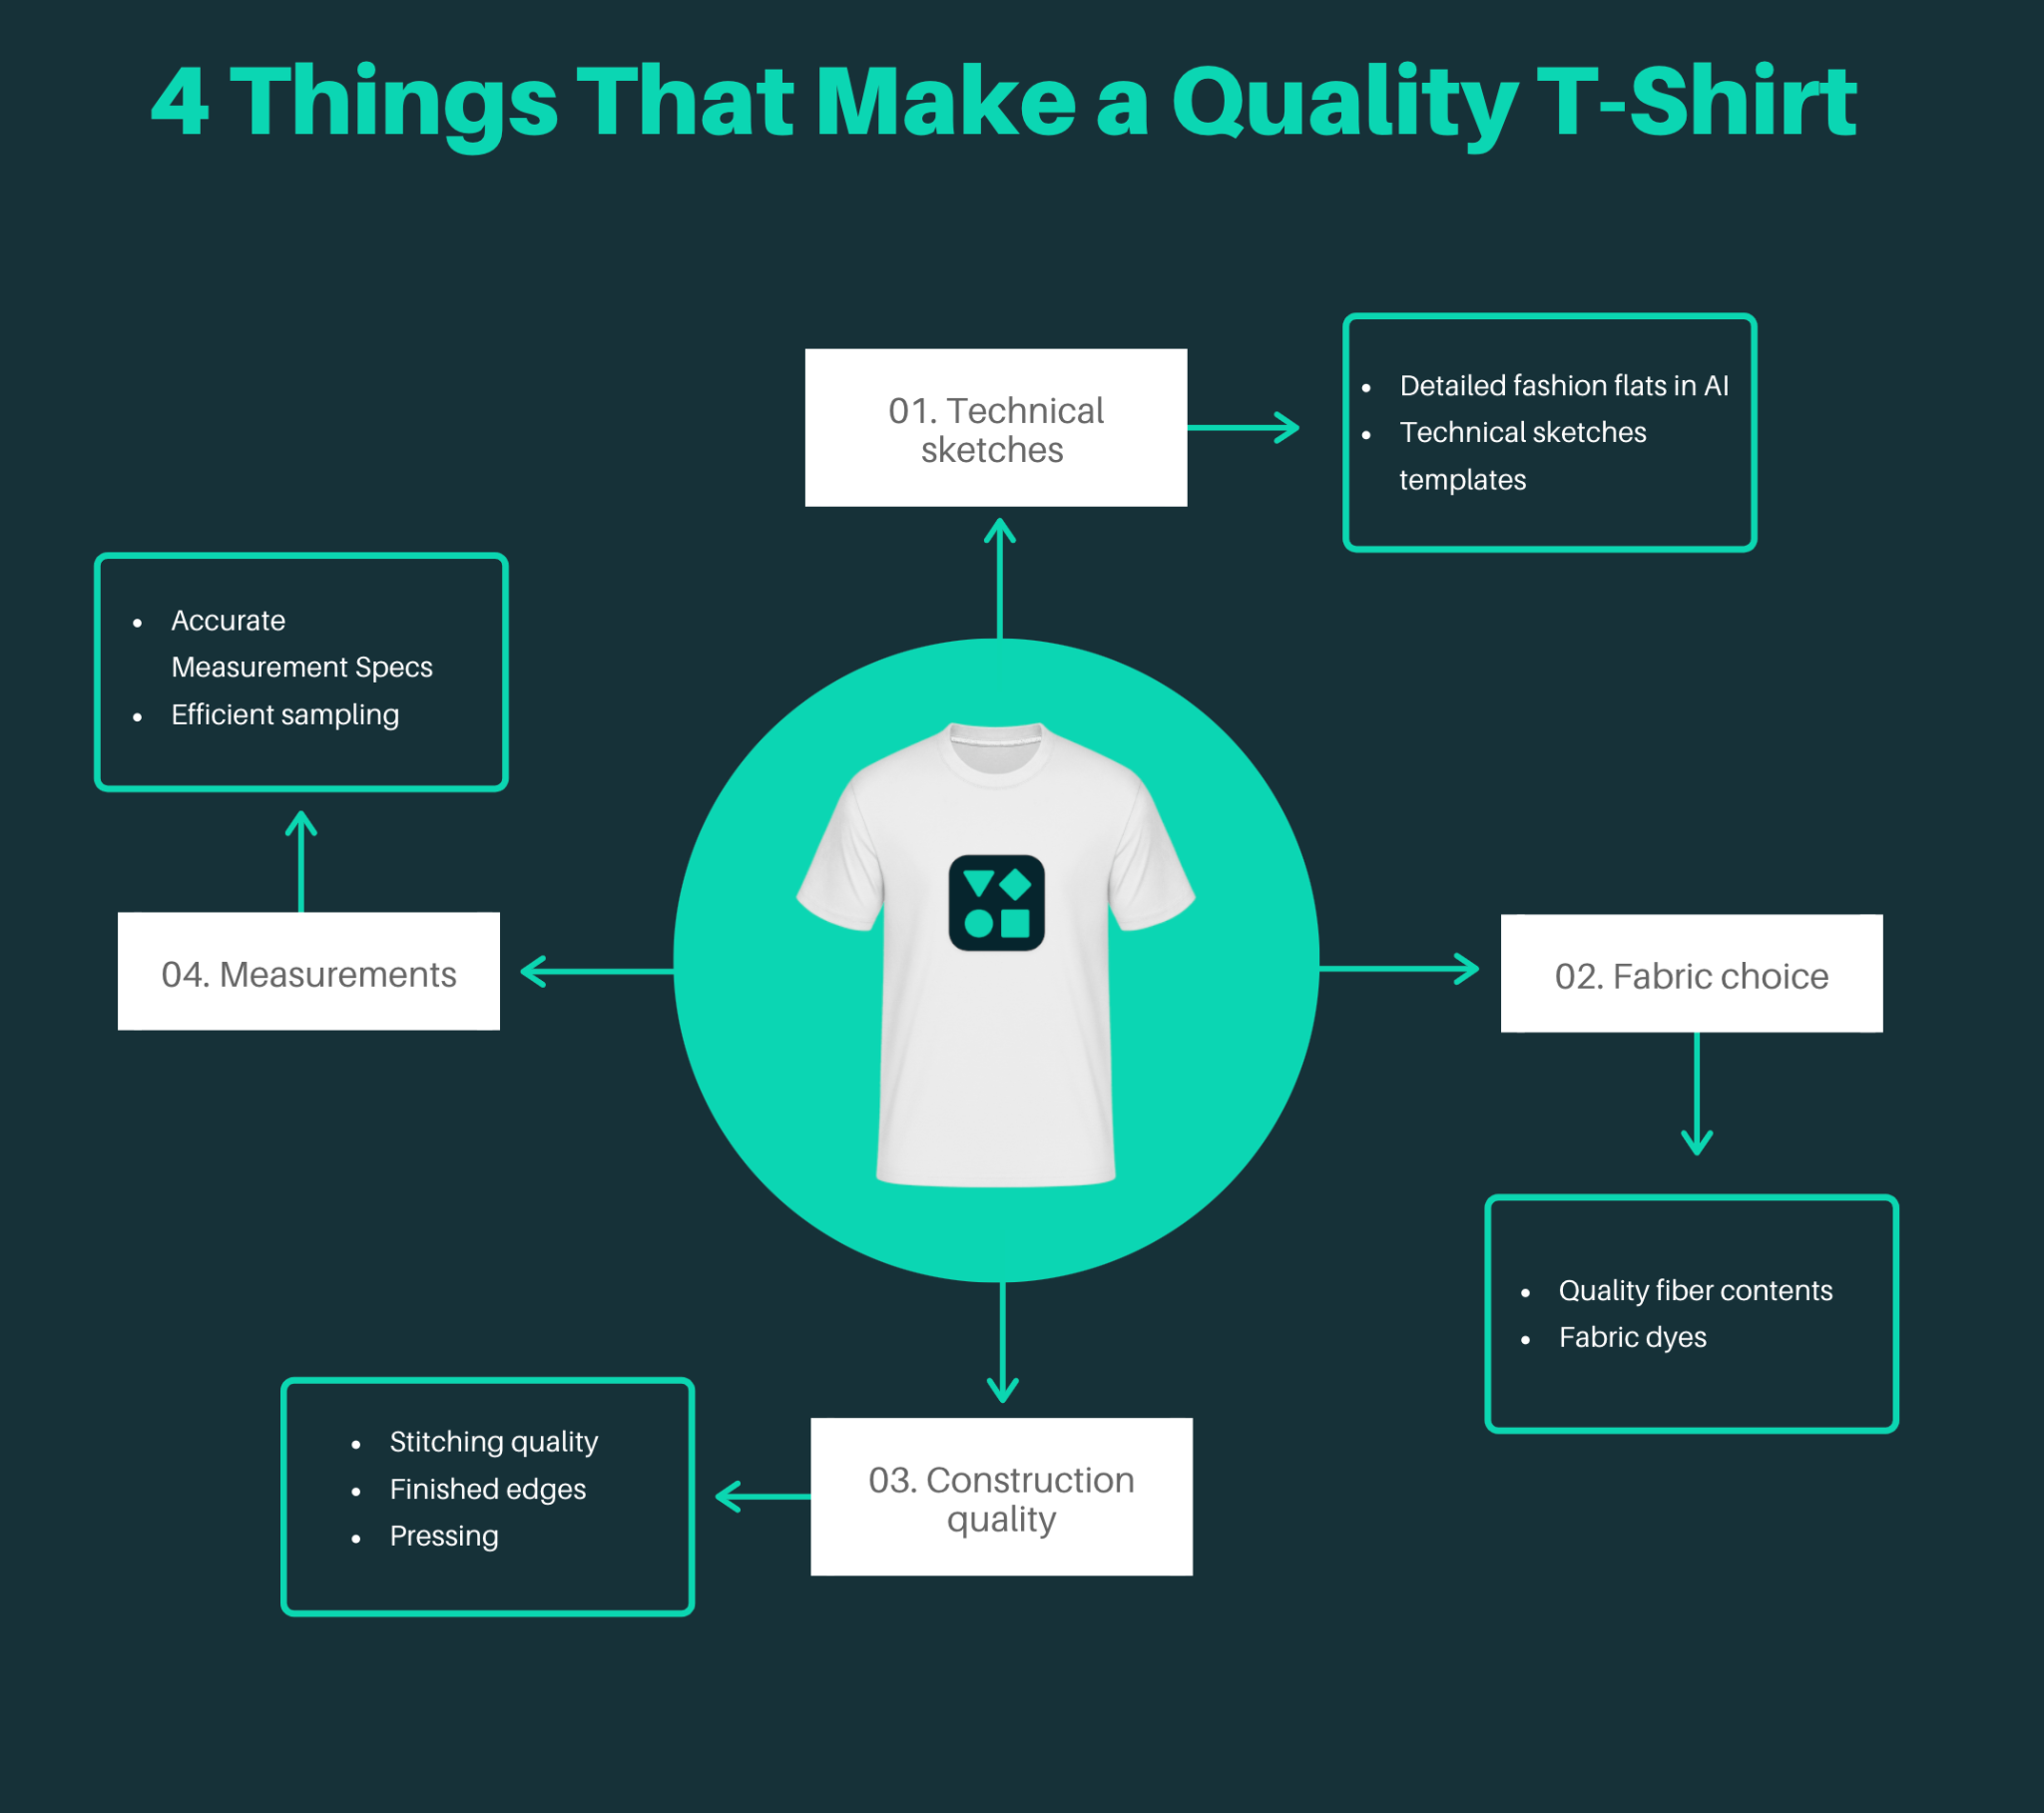 4 Things to Look for in a Quality T-Shirt